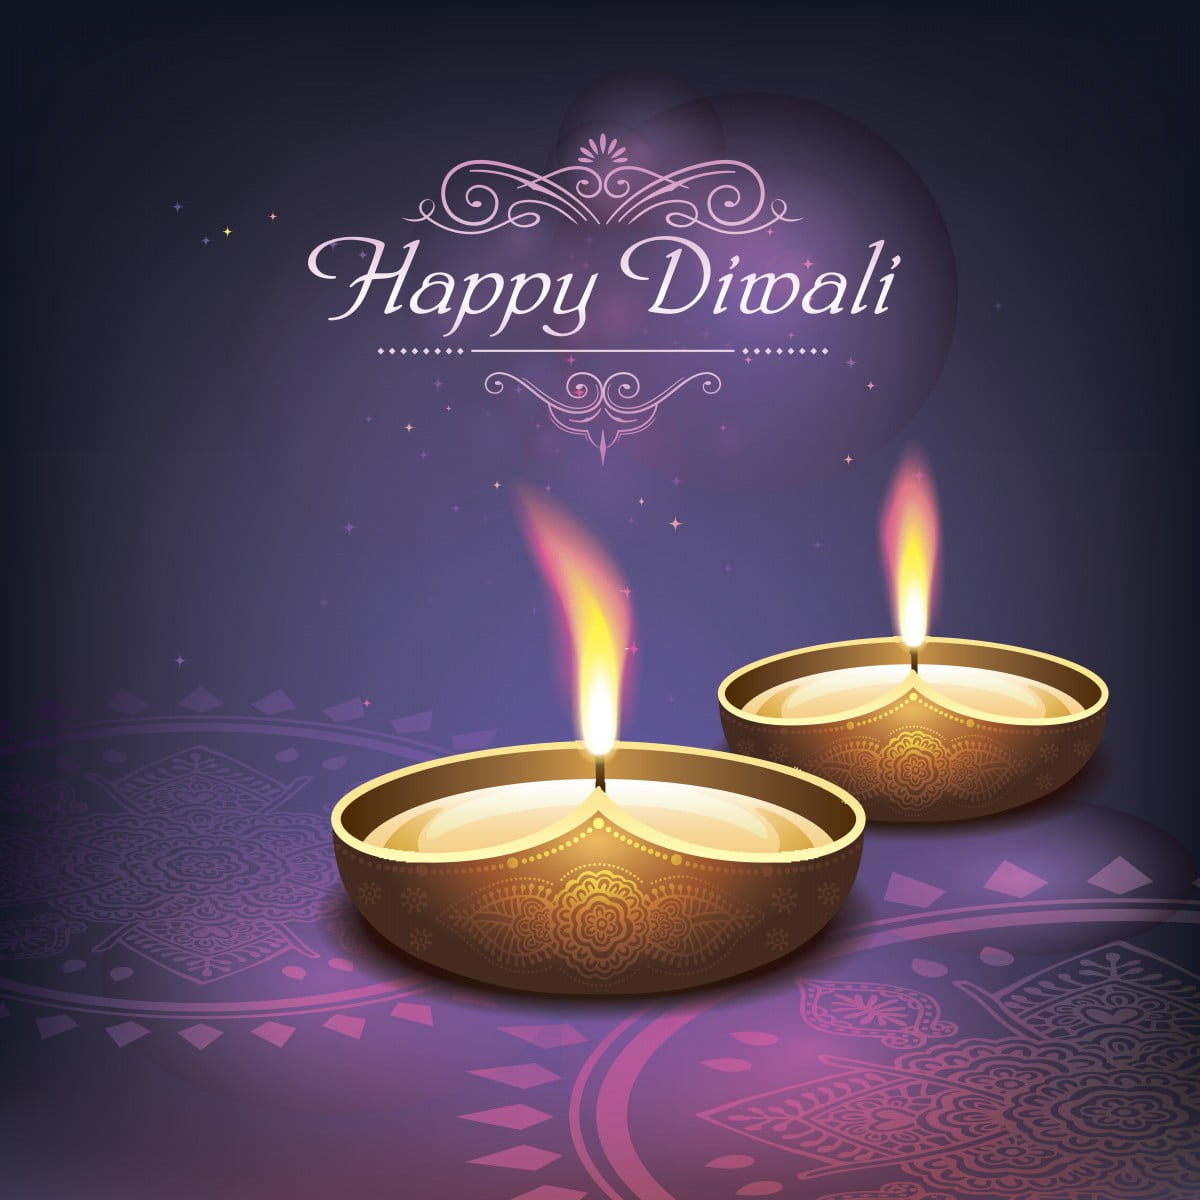 47+ Diwali Wishes Images Hd Gif